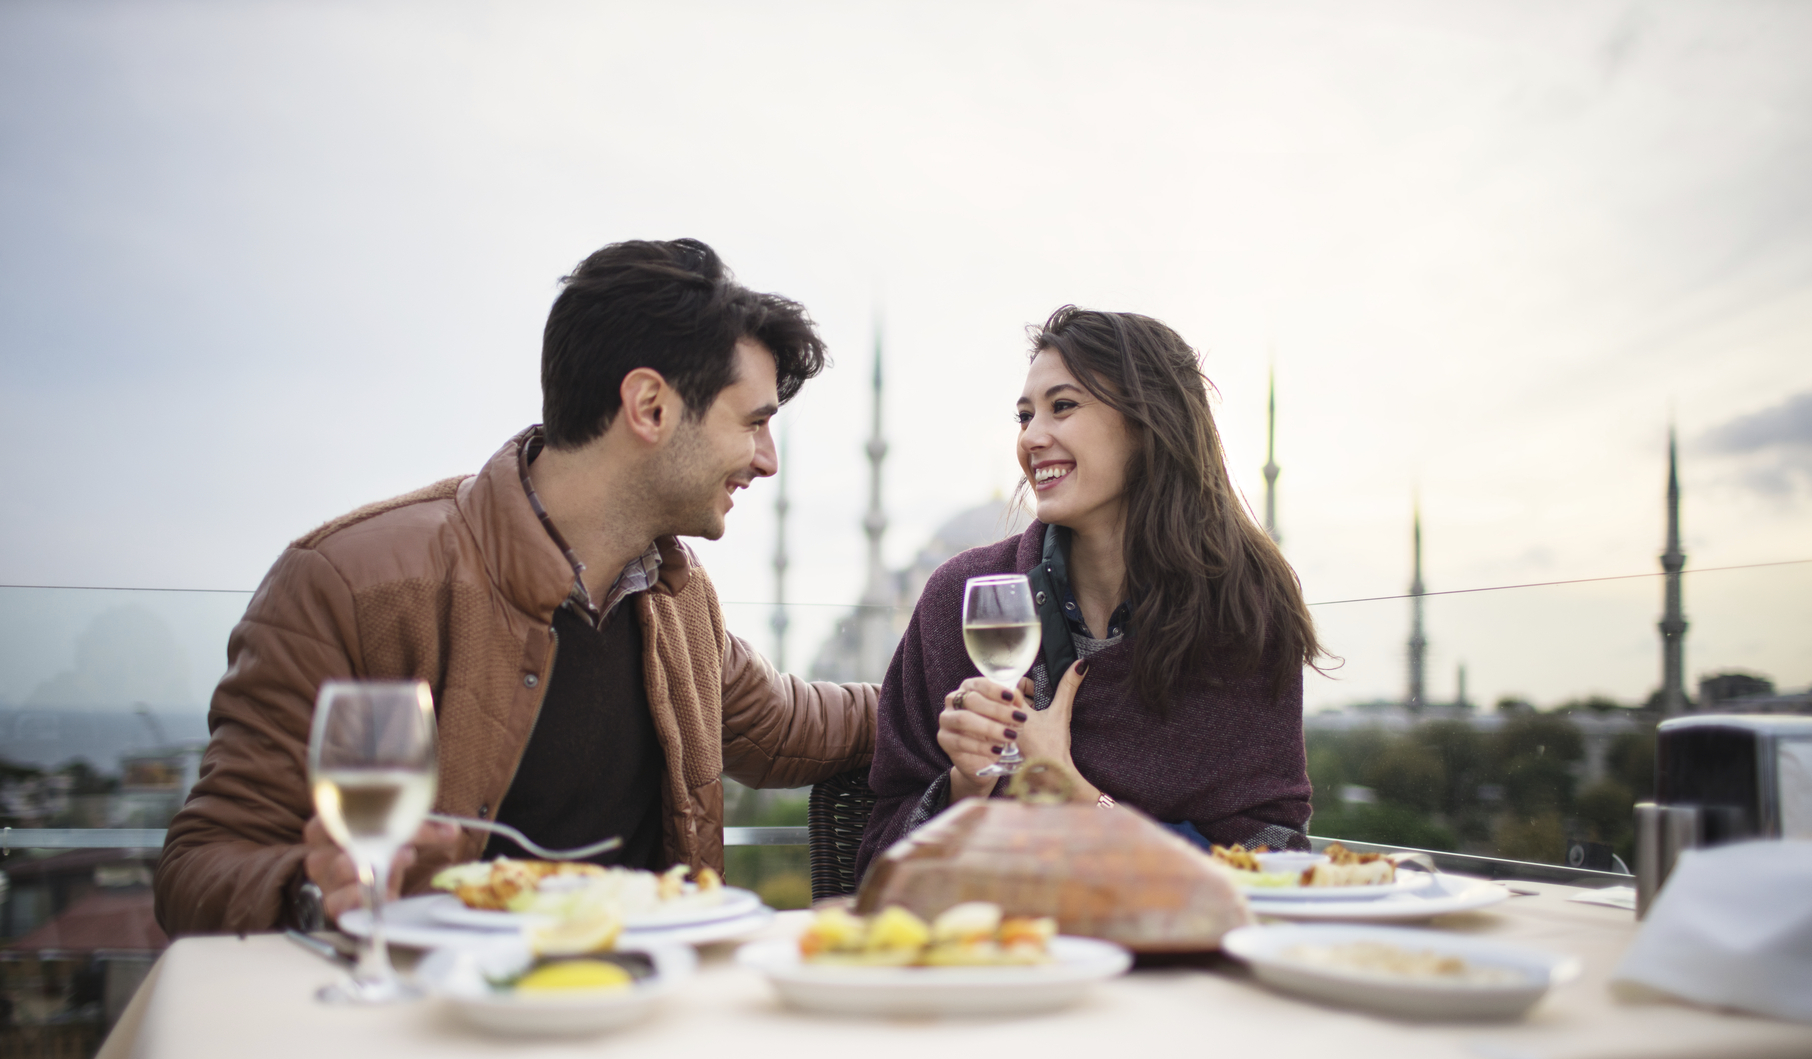 5 First Date Tips To Use When Meeting Offline For The First Time